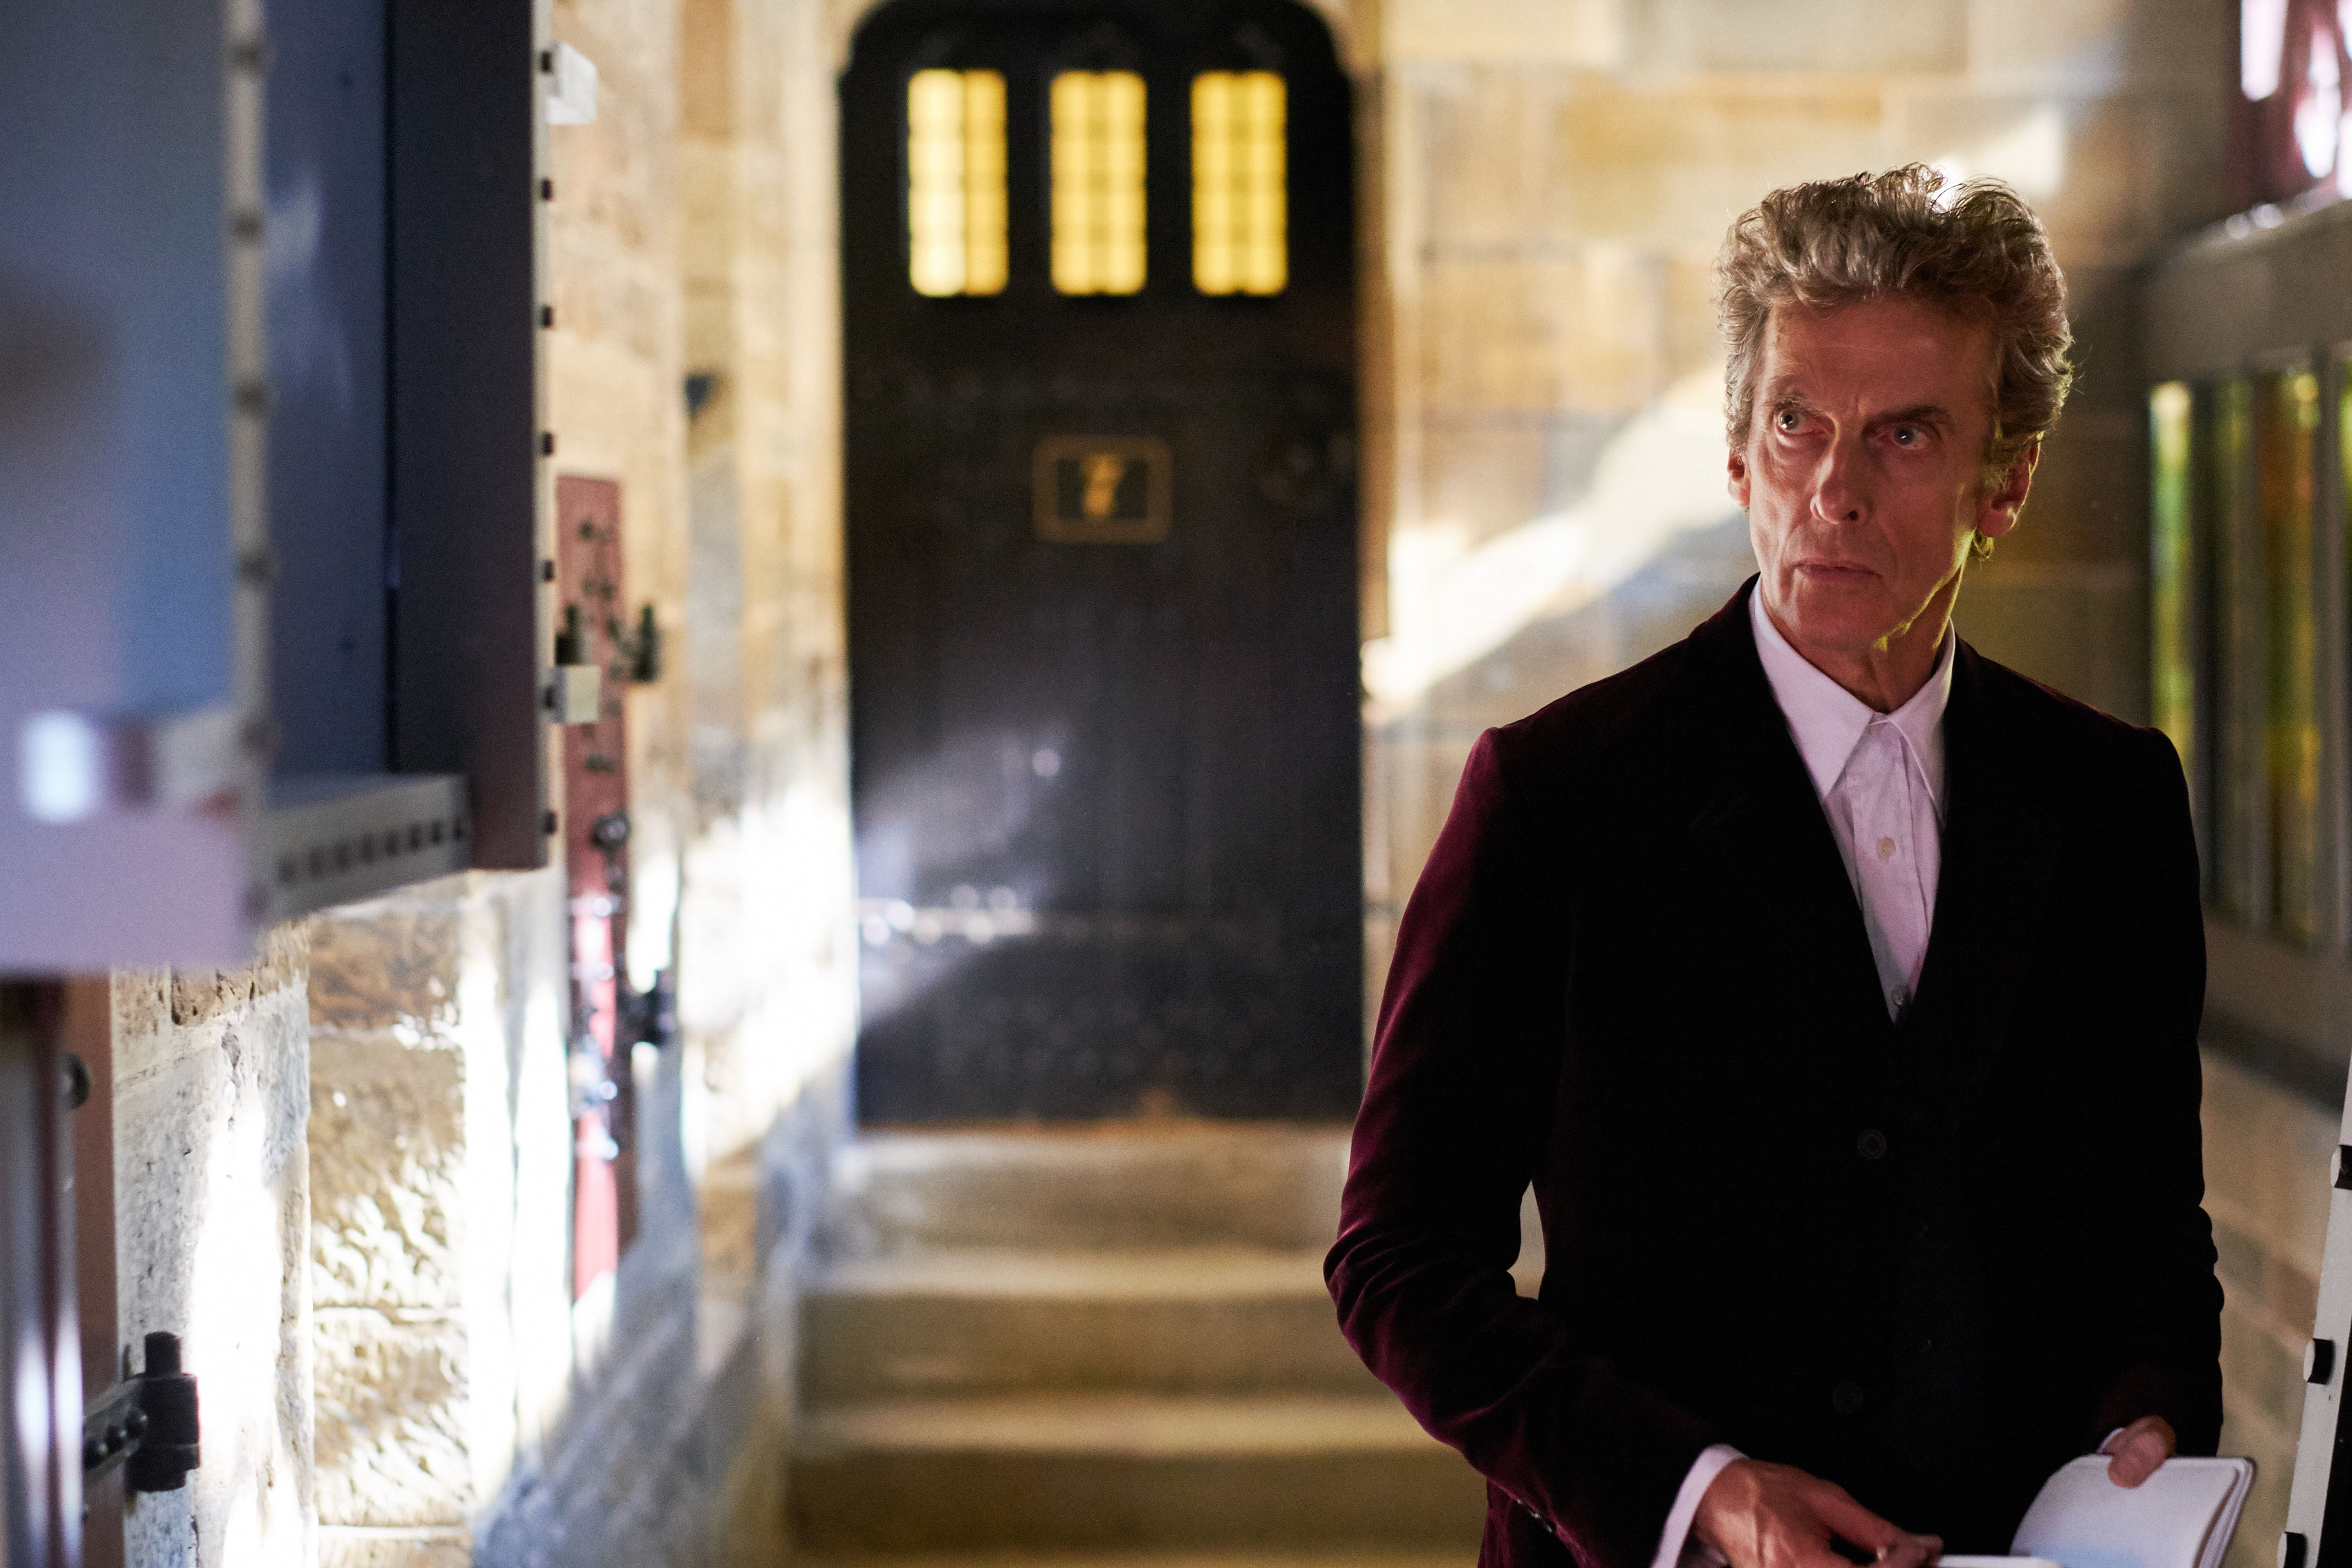 Doctor Who Peter Capaldi As 12Th Doctor Wallpapers